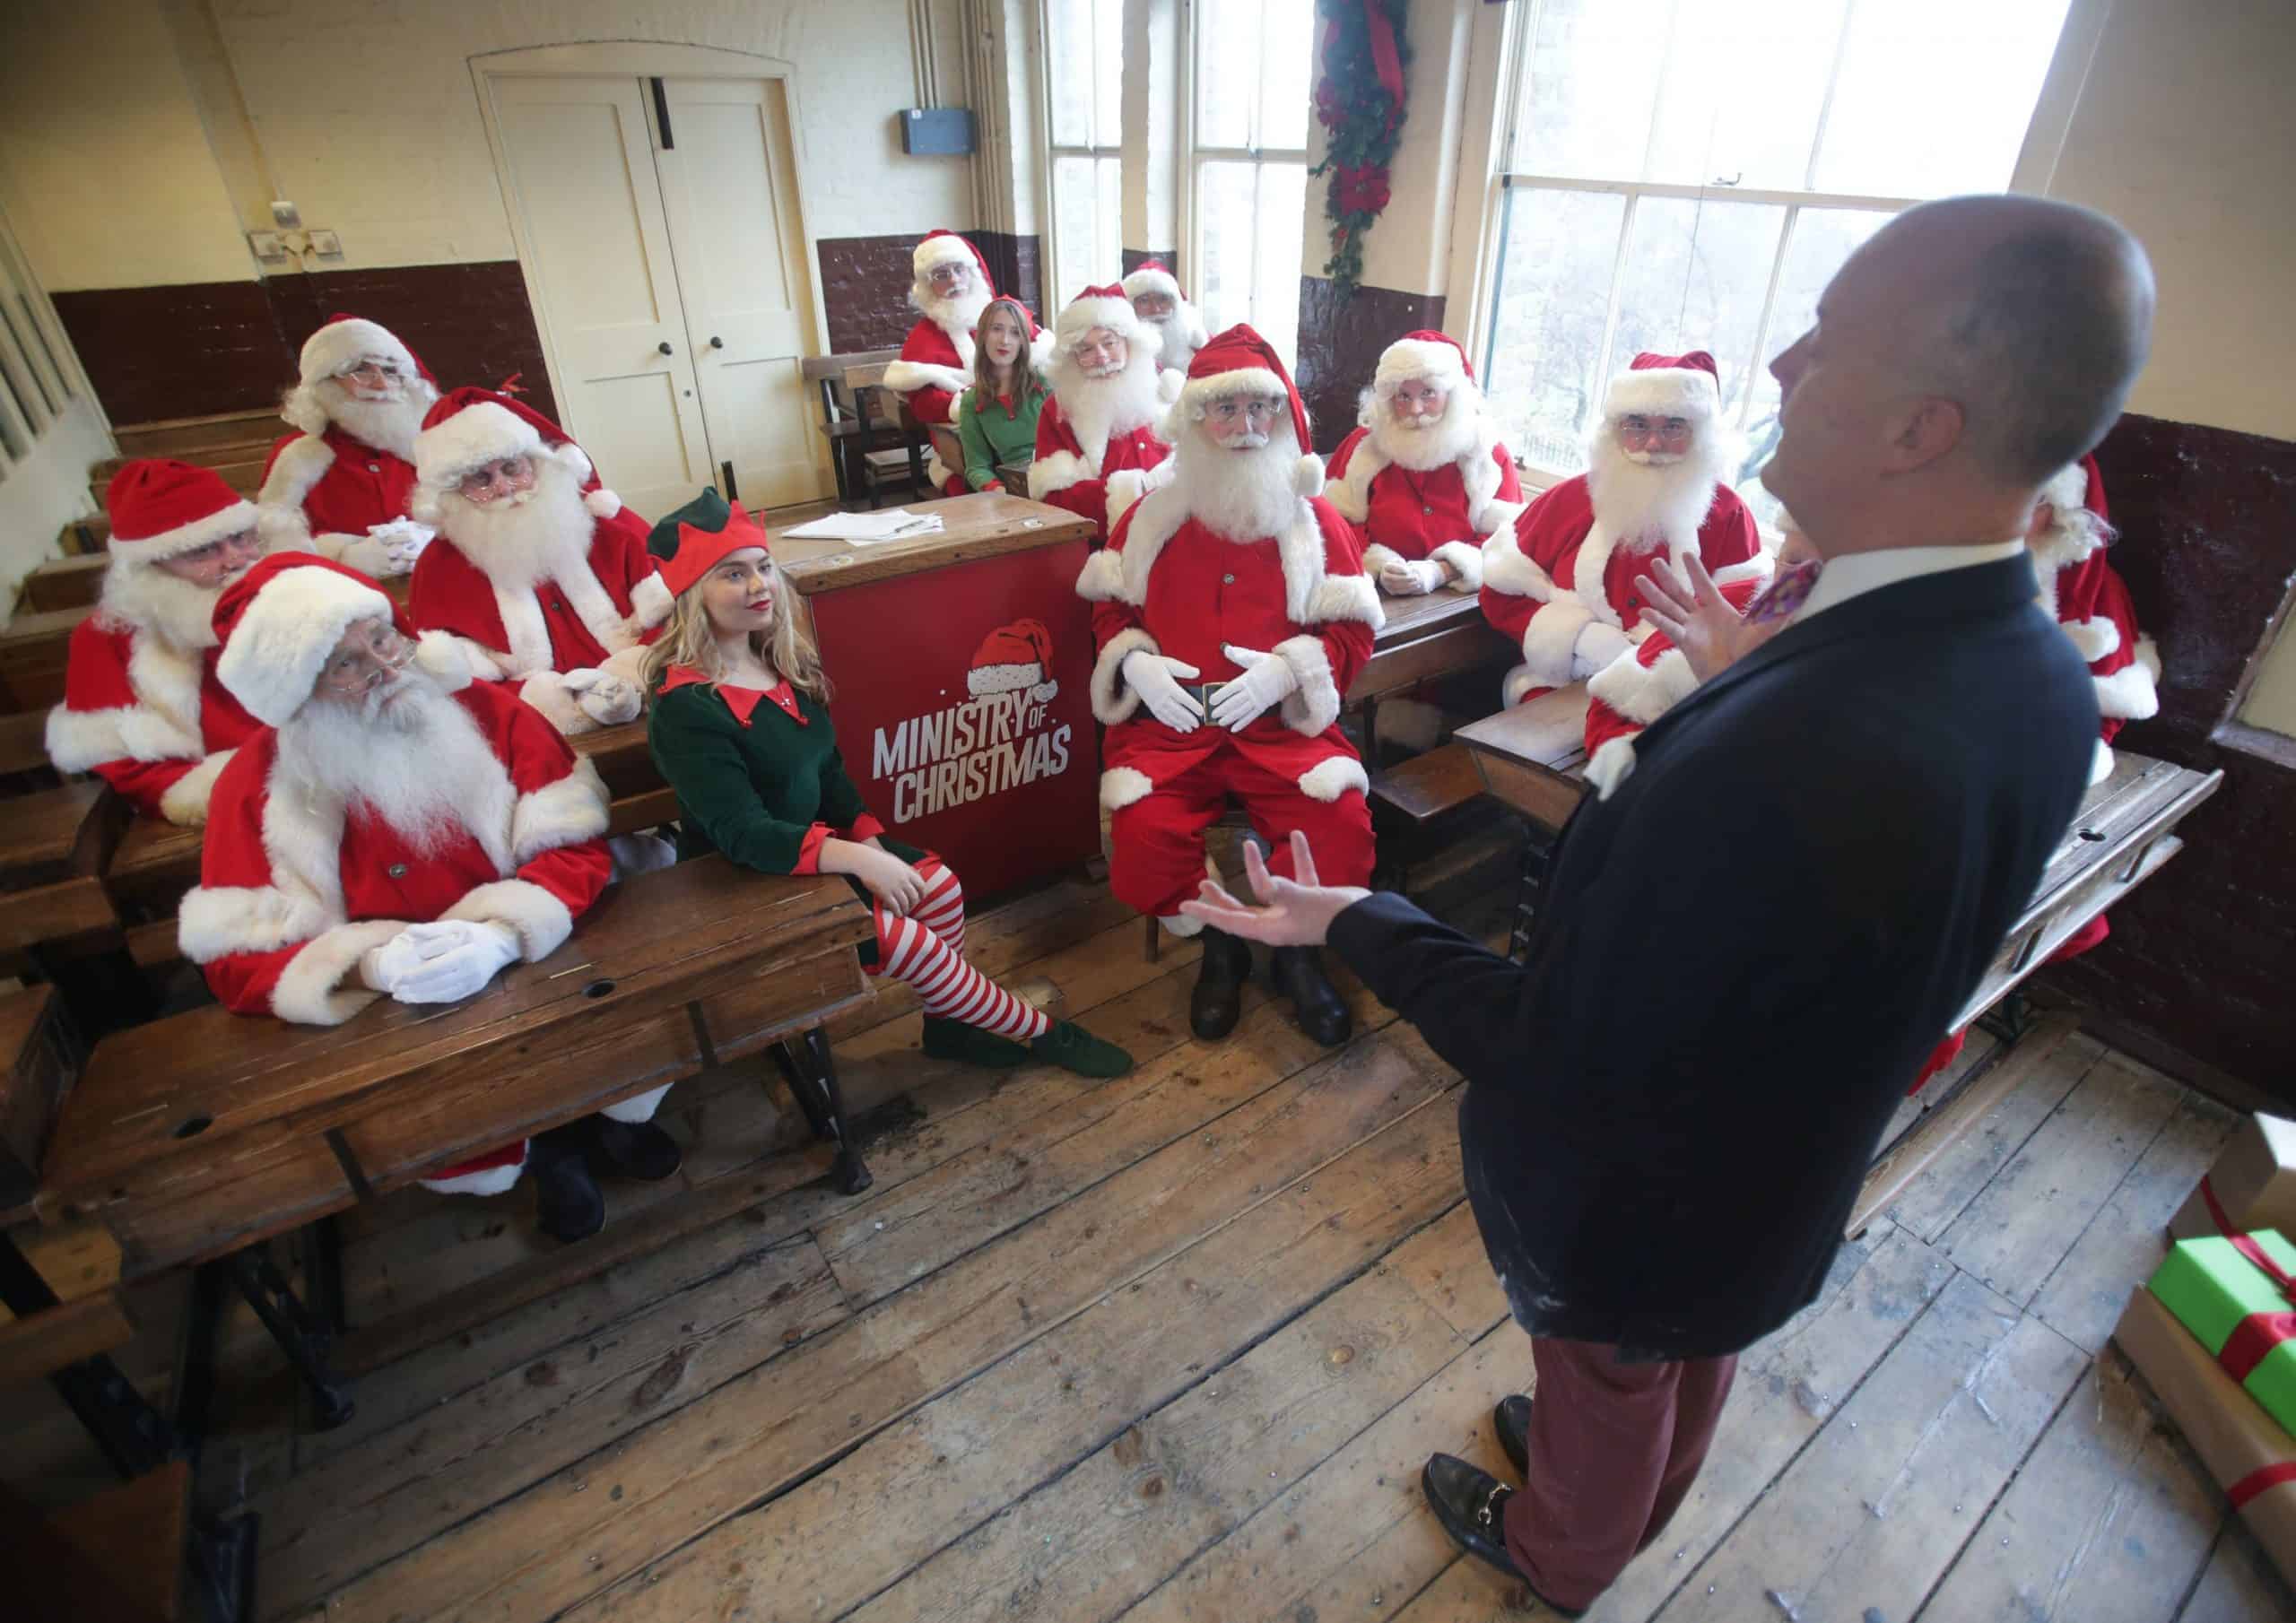 Christmas ‘cancelled’ as Govt labelled ‘liars,charlatans & clowns’ over Covid handling